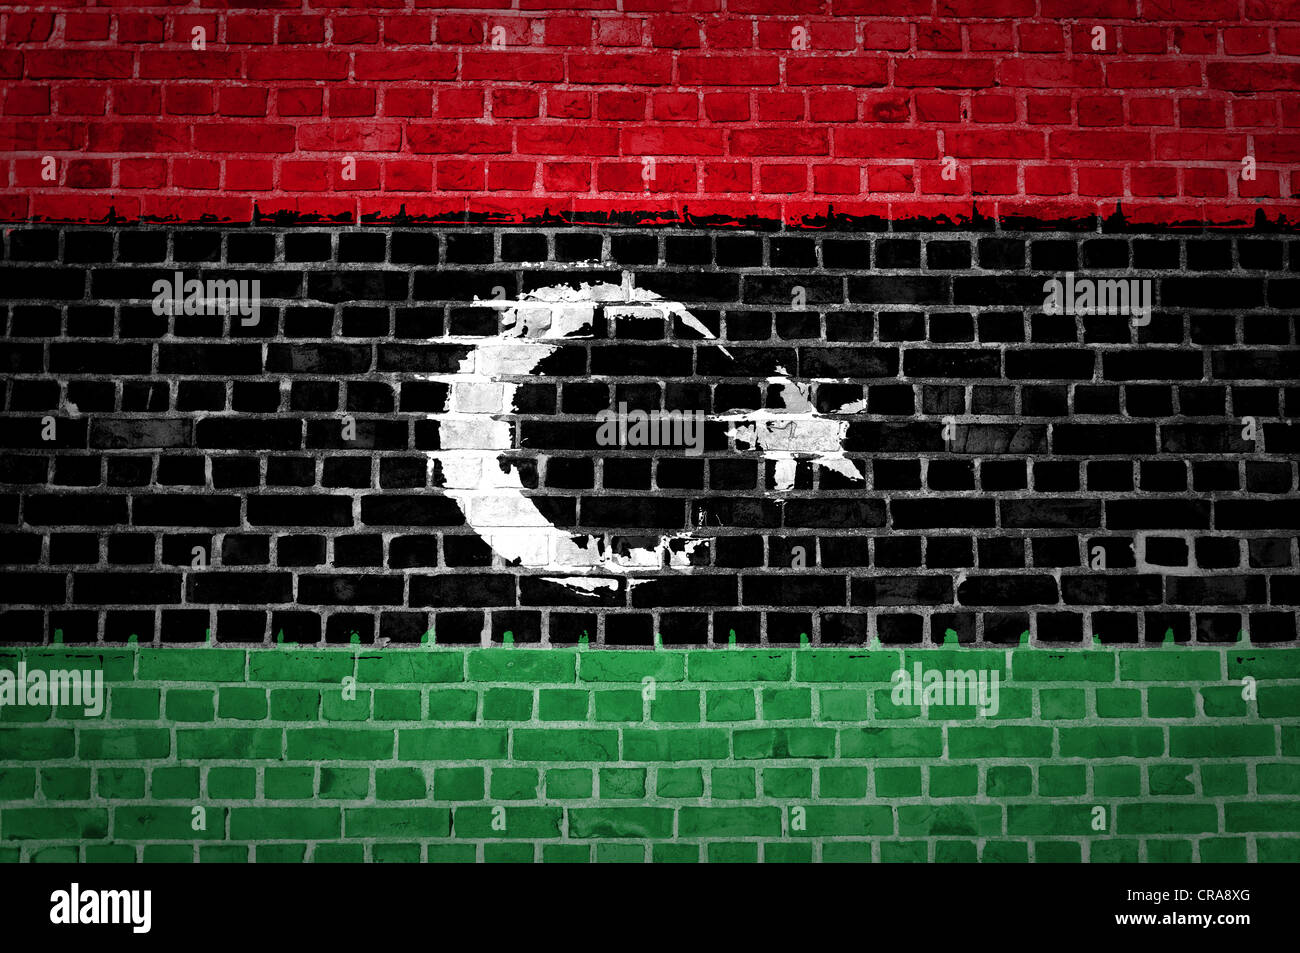 An image of the Libya flag painted on a brick wall in an urban location Stock Photo